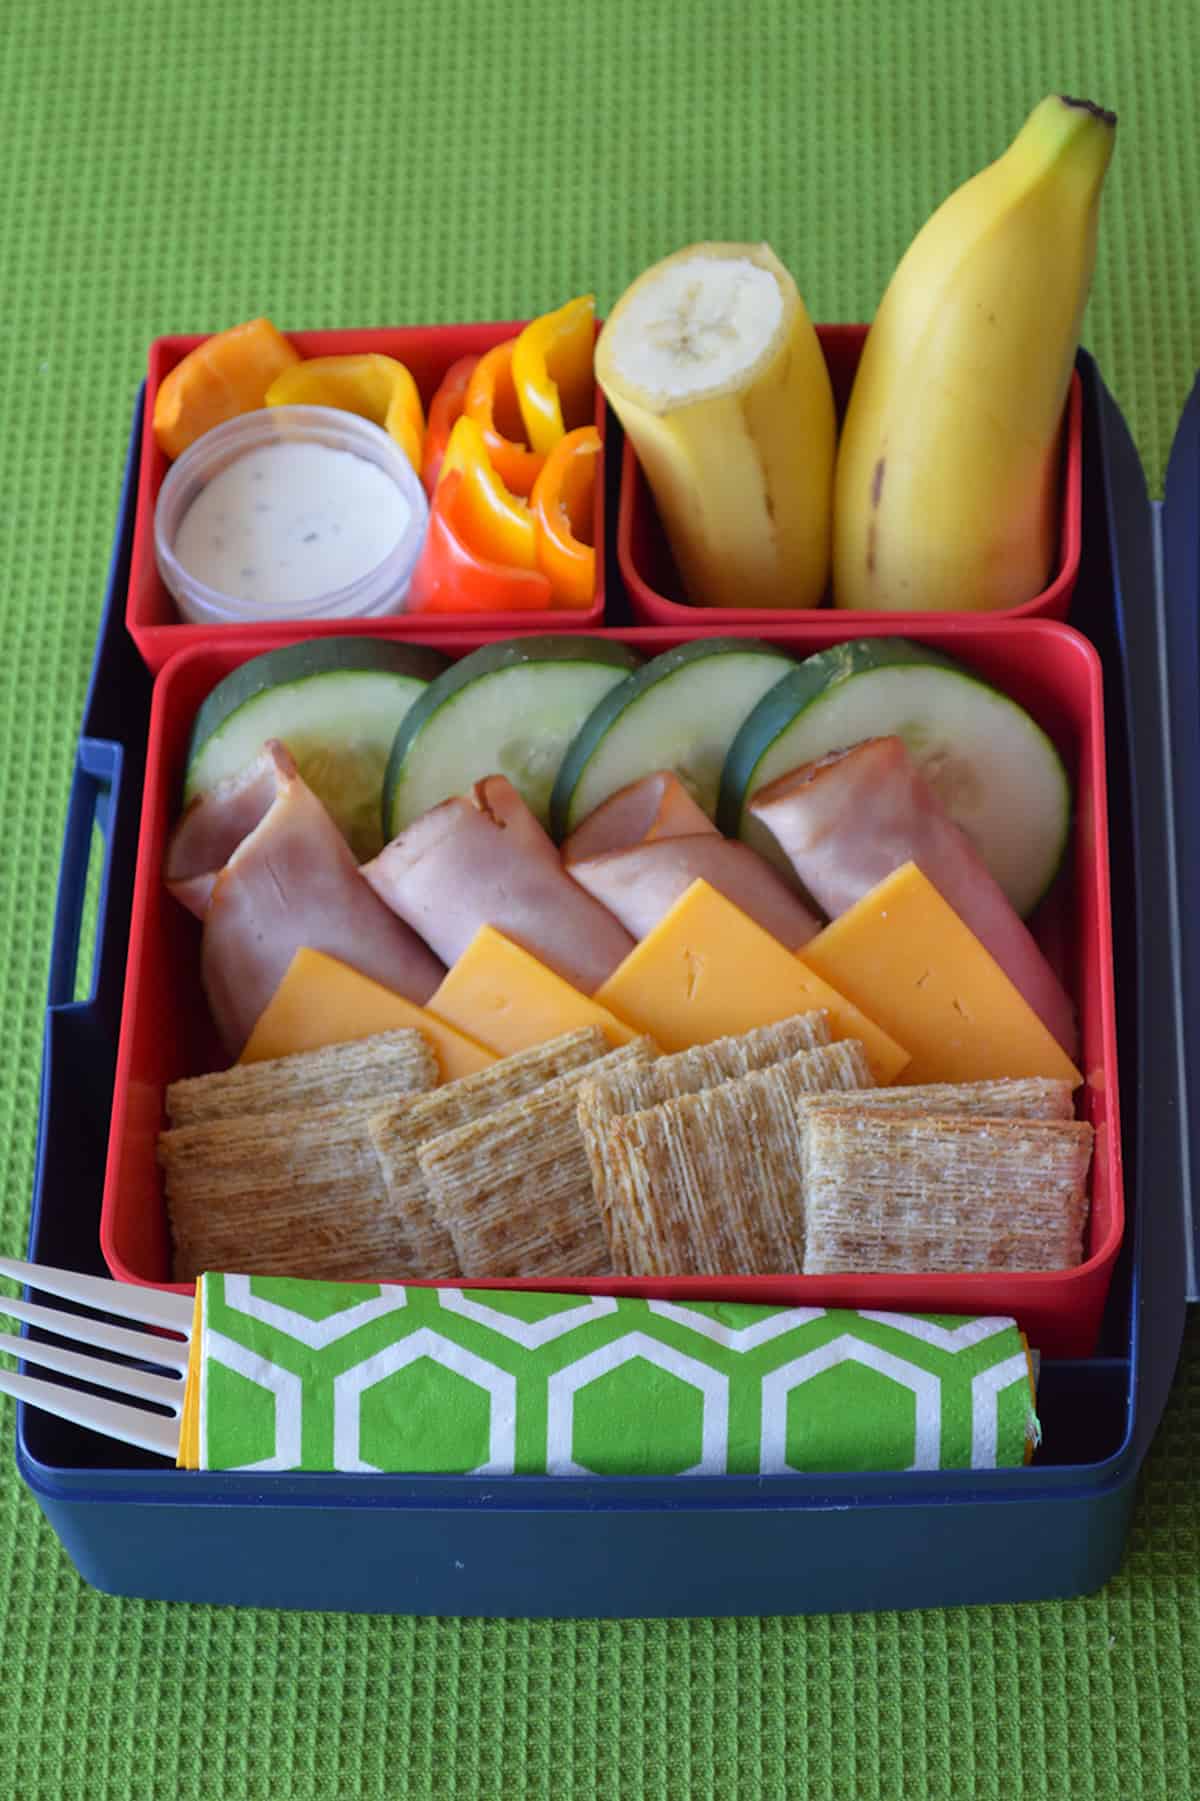 https://healthyfamilyproject.com/wp-content/uploads/2014/09/web-Easy-Lunch-Stackers-Bento-Box-1.jpg